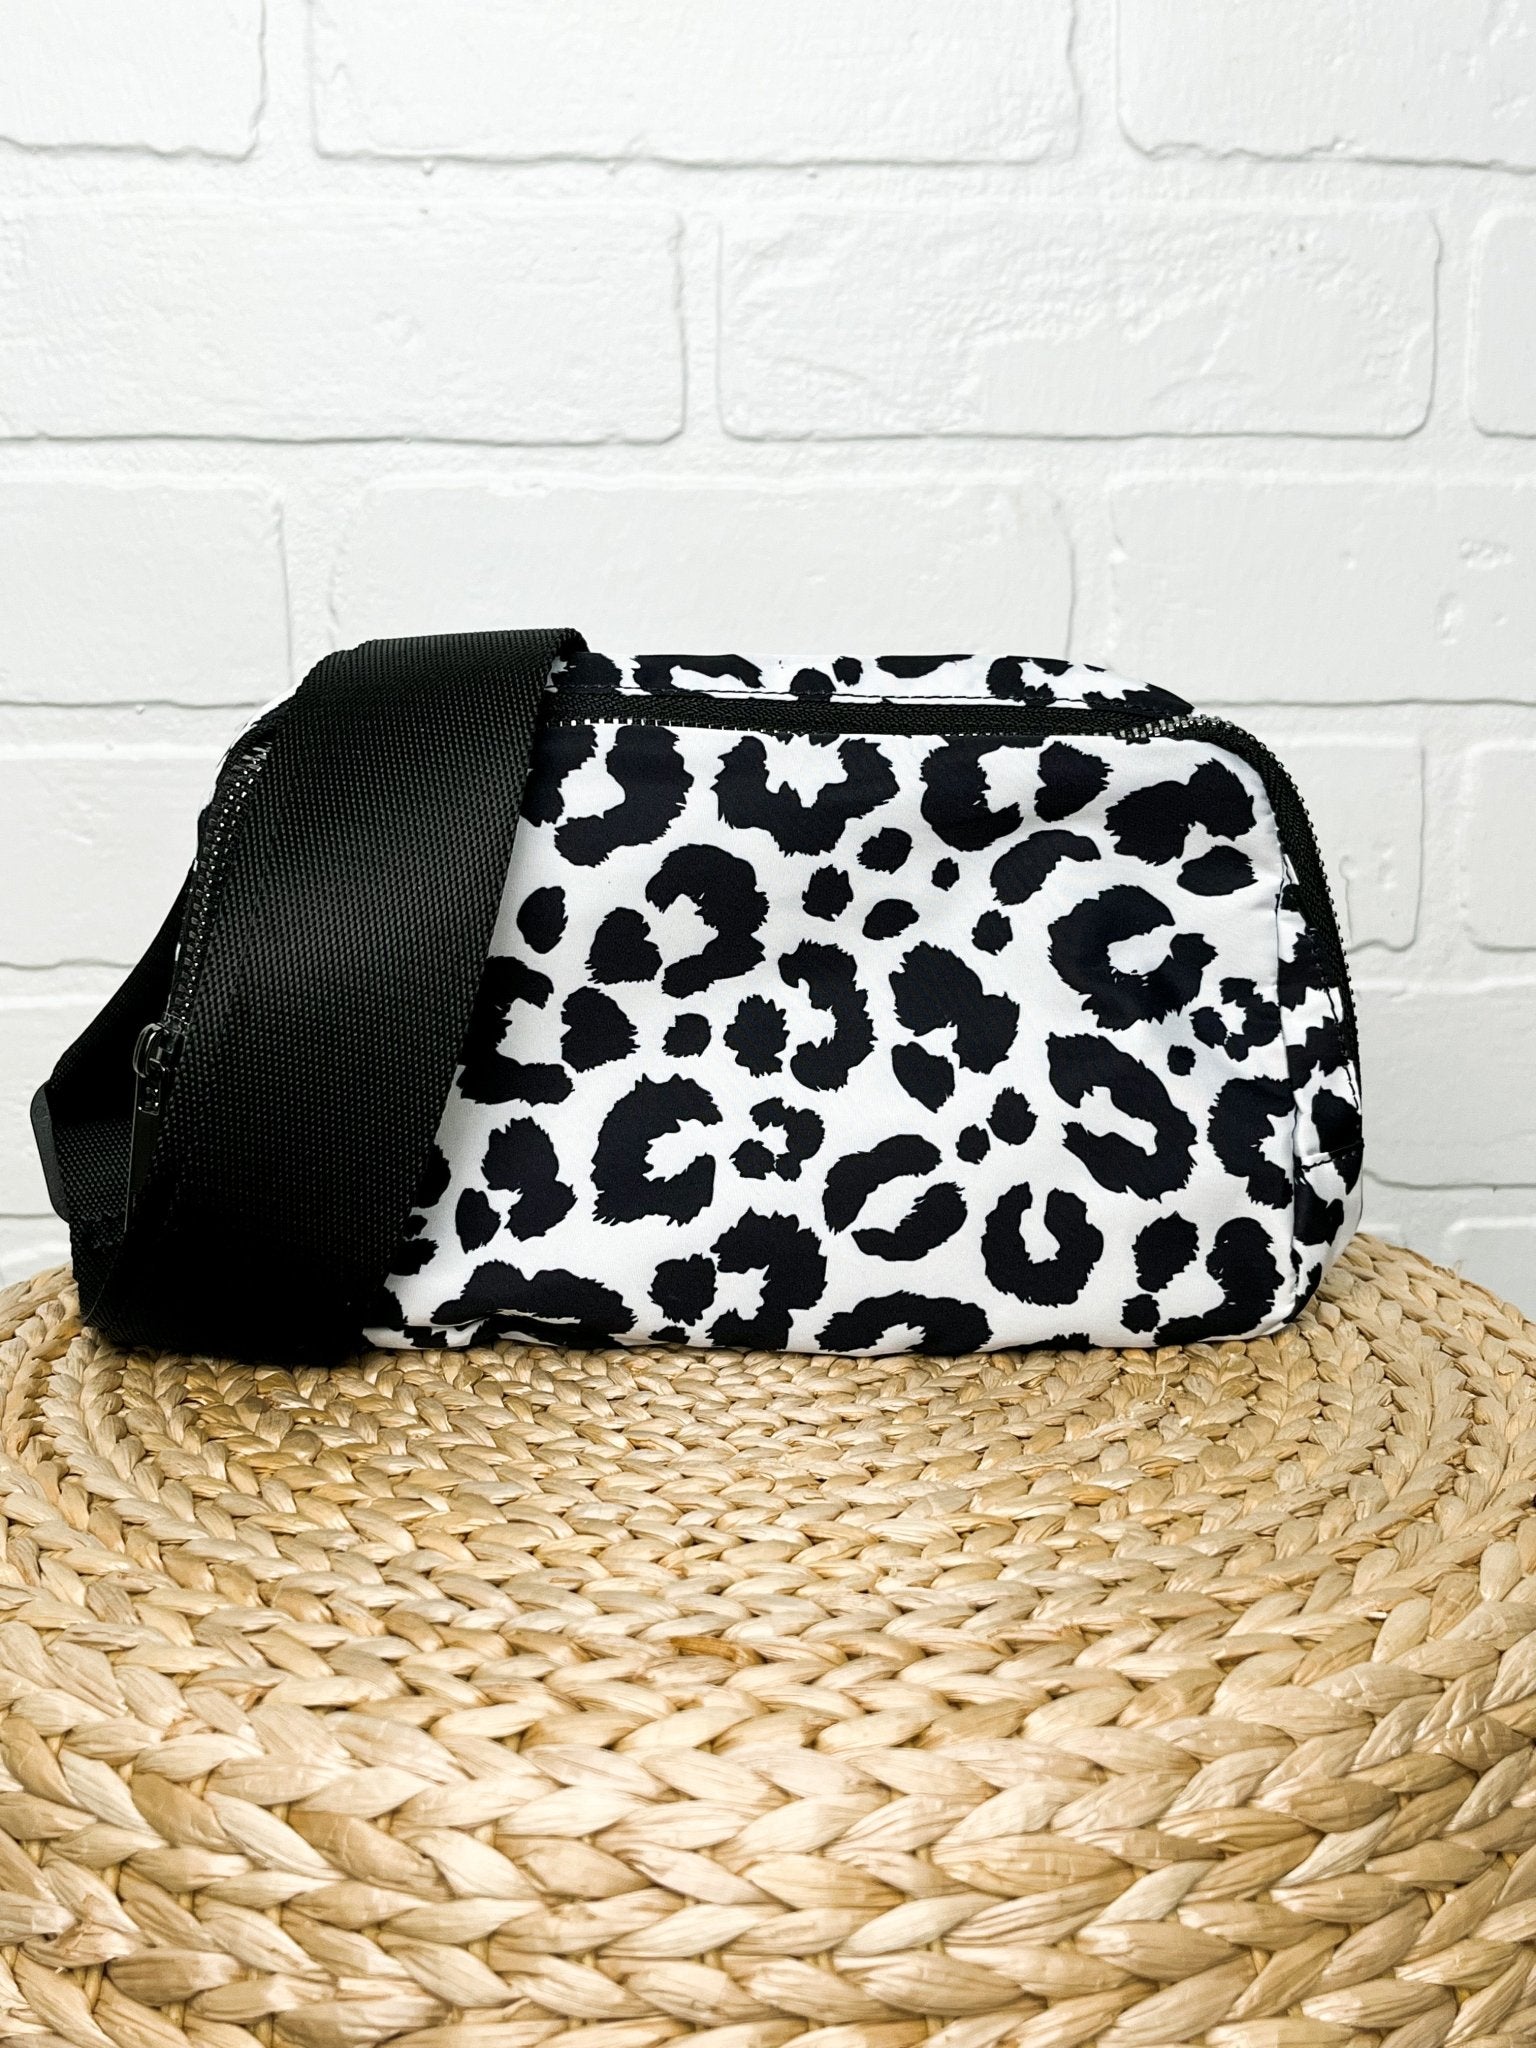 Sling belt bag black leopard - Trendy Bags at Lush Fashion Lounge Boutique in Oklahoma City